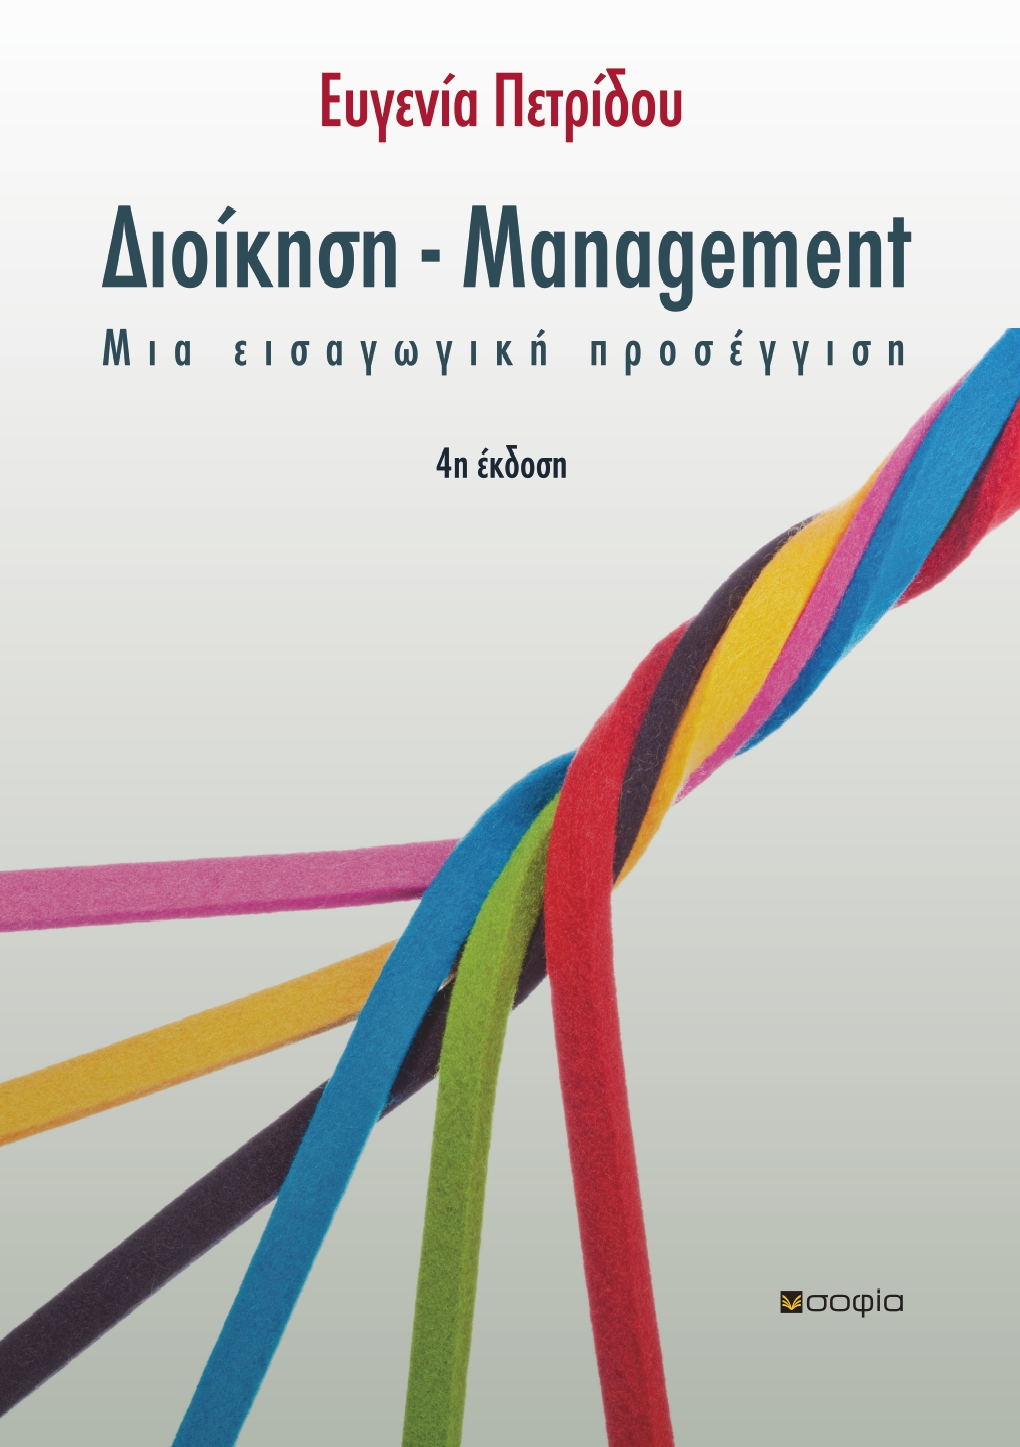 Petridou Eugenia  Administration-Management 4th edition  An Introductory Approach